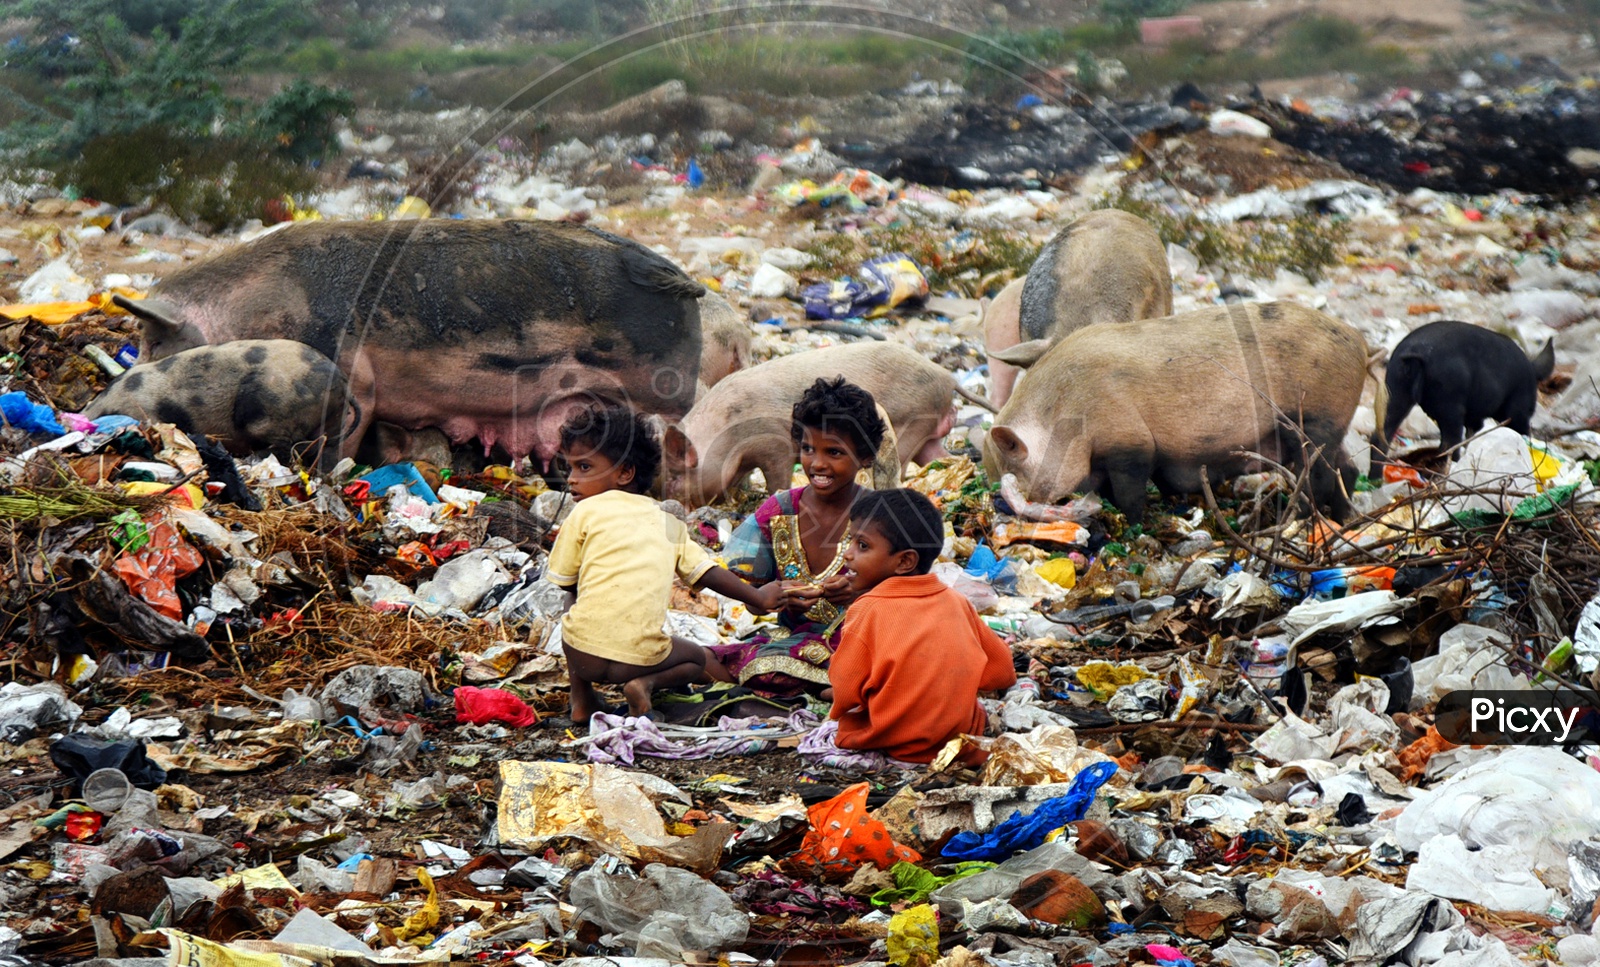 Children playing in the garbage near pigs